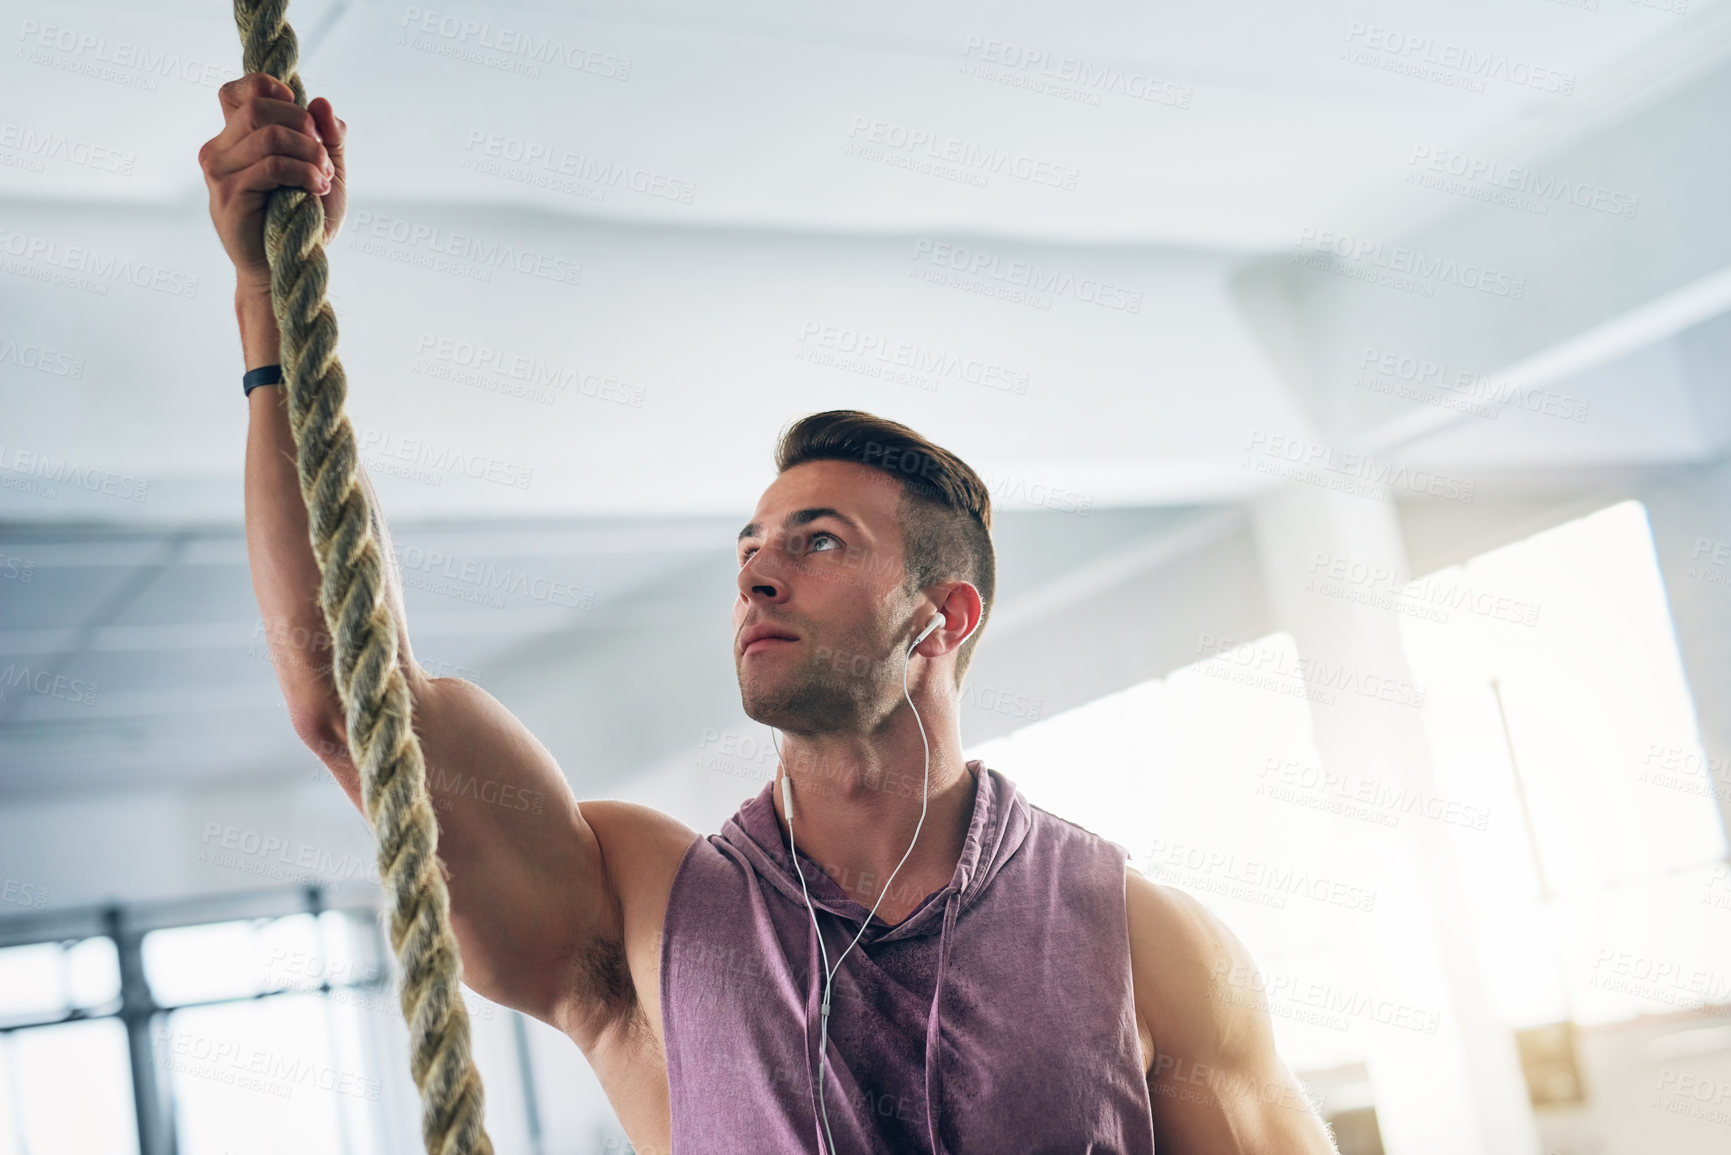 Buy stock photo Shot of a muscular young man climbing a rope at the gym